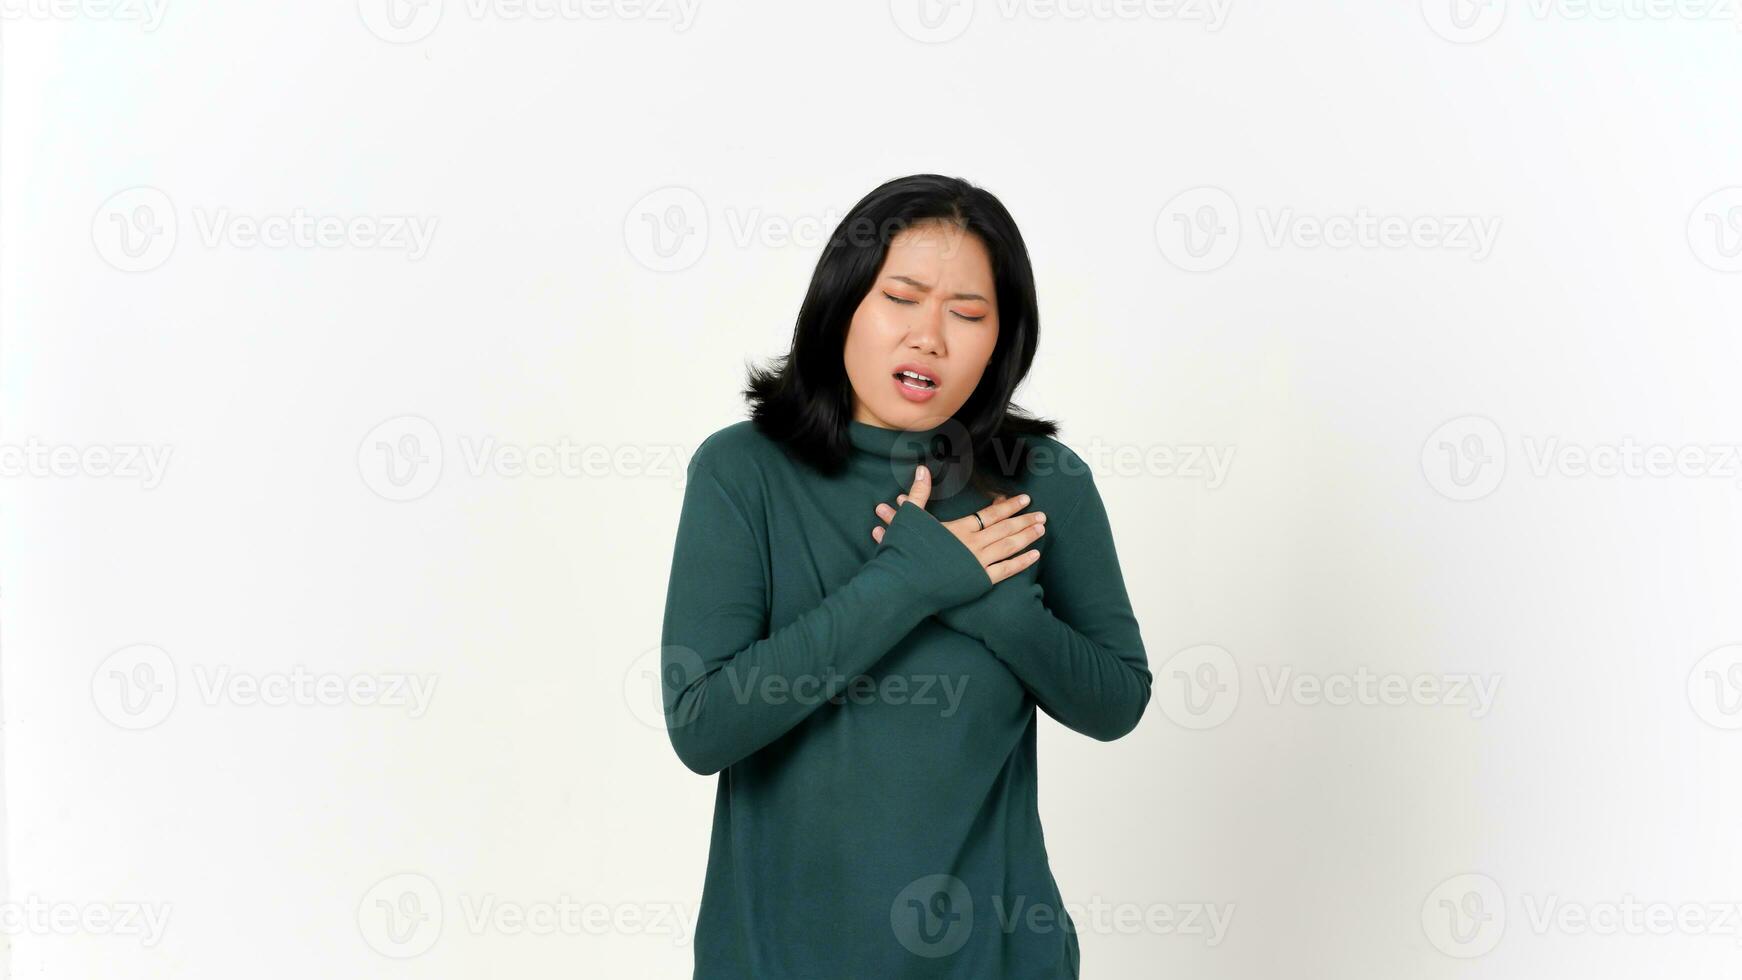 Hand on Chest Feeling Pain On Chest Of Beautiful Asian Woman Isolated On White Background photo